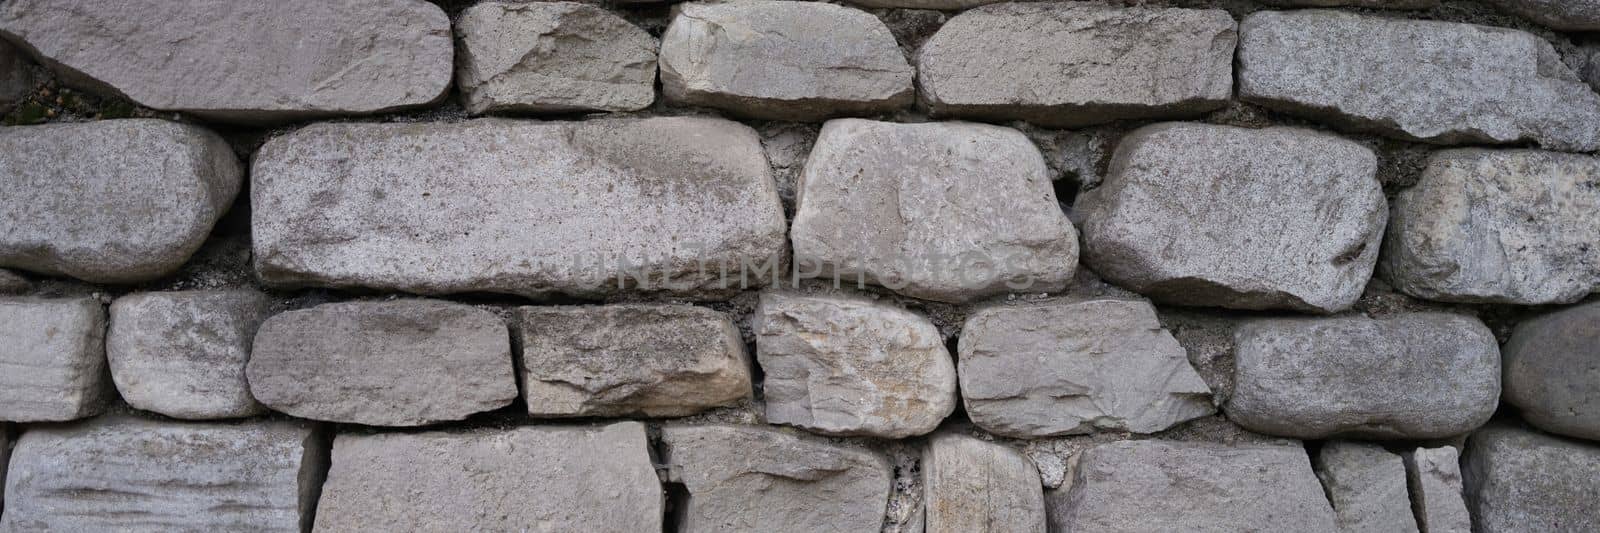 Stone old wall fencing seamless texture closeup by kuprevich